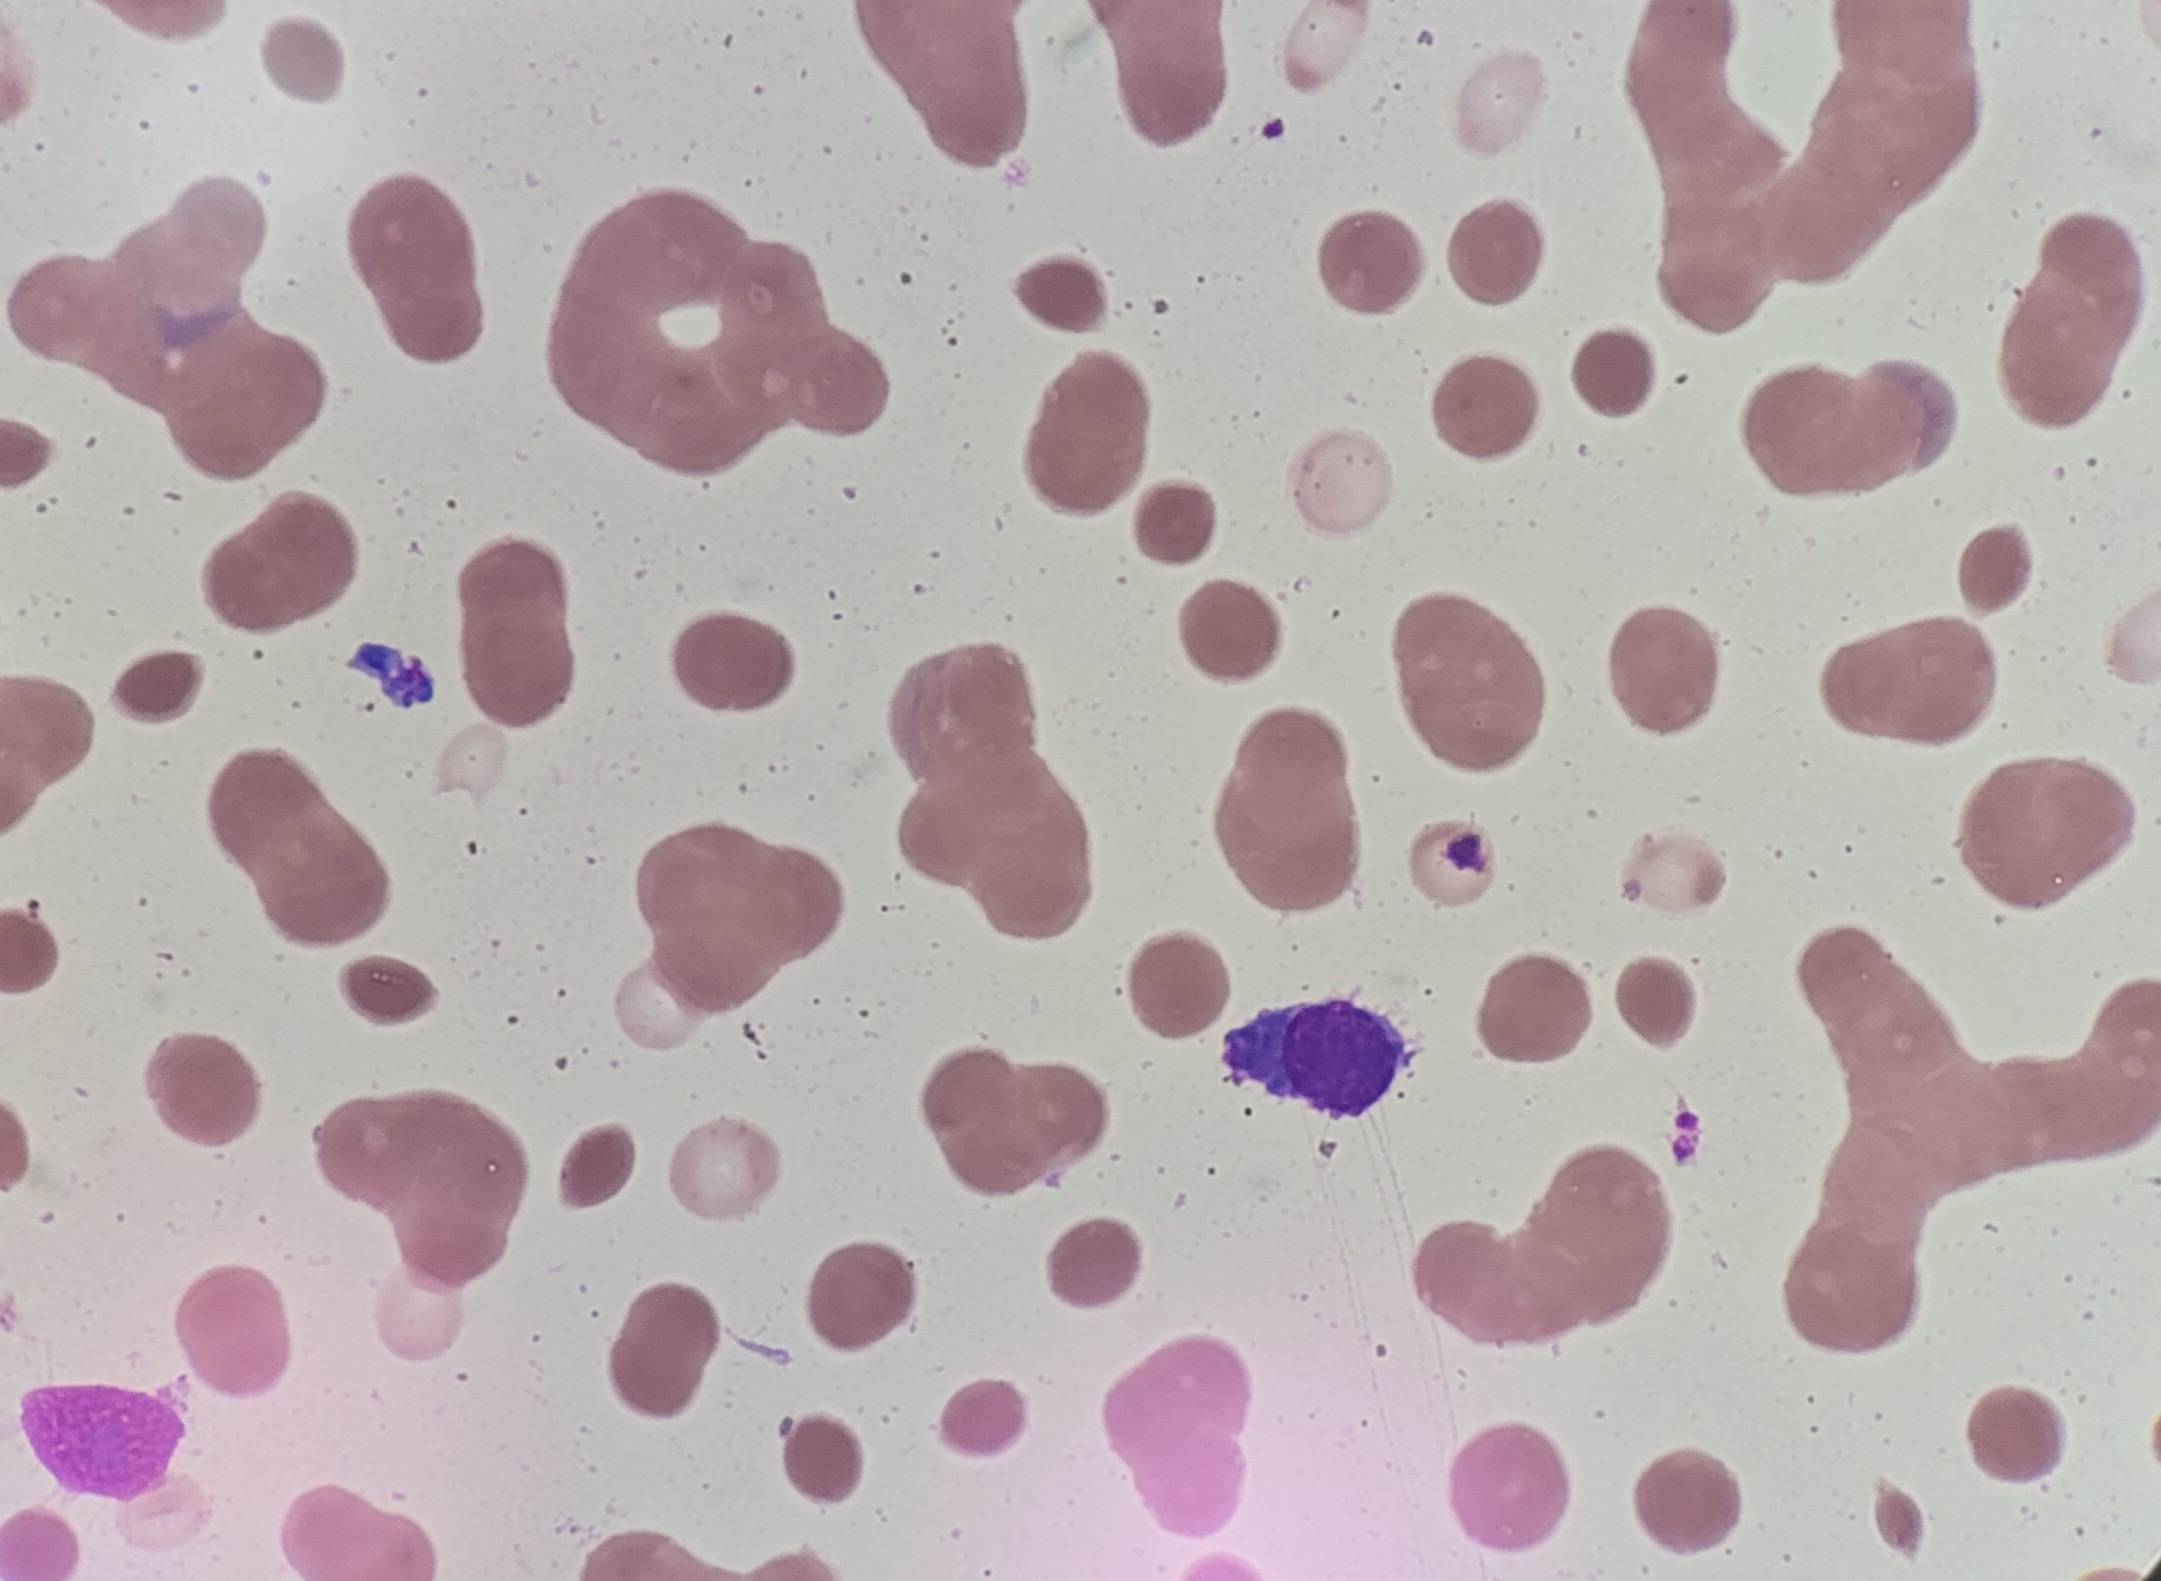 Bone marrow cytology showed atypical plasma cells and atypical lymphocytes, compatible with plasma cell myeloma 